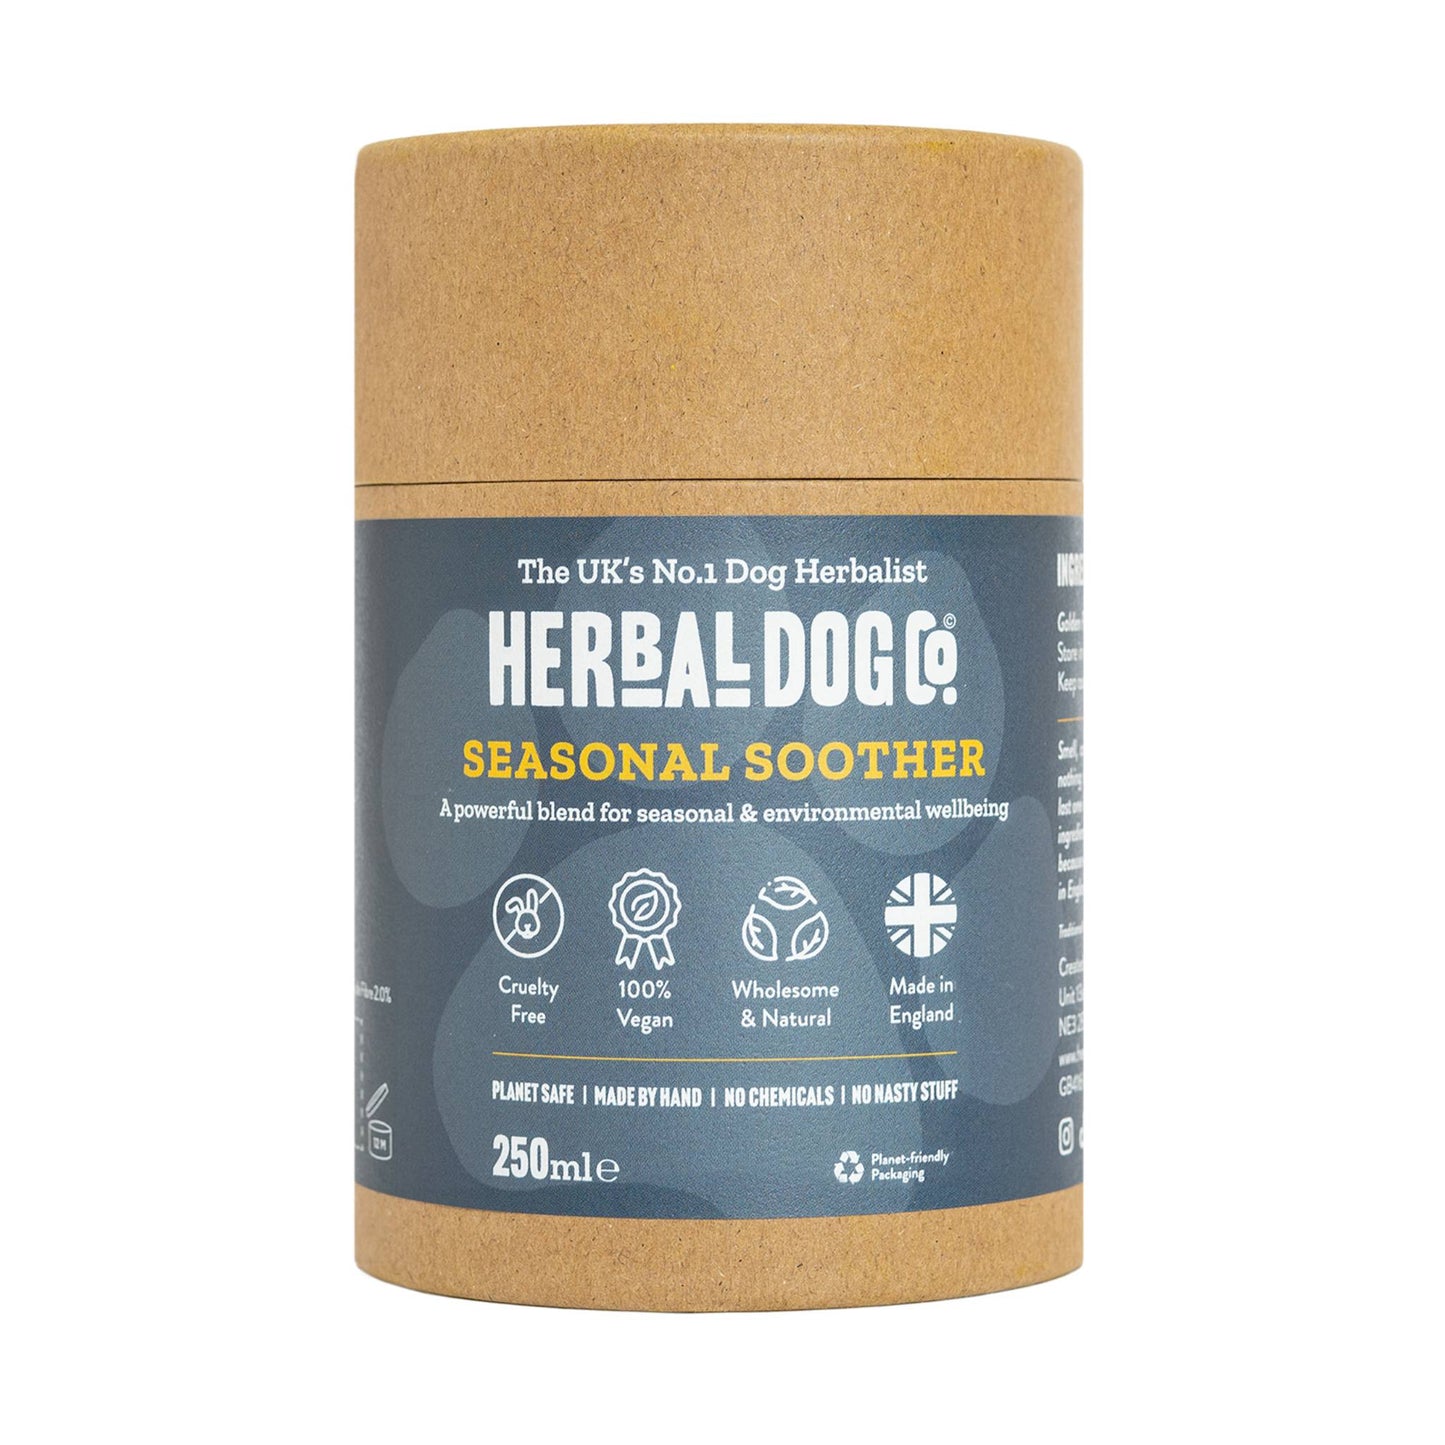 Herbal Dog Co Seasonal Soother Environmental Allergy Supplement